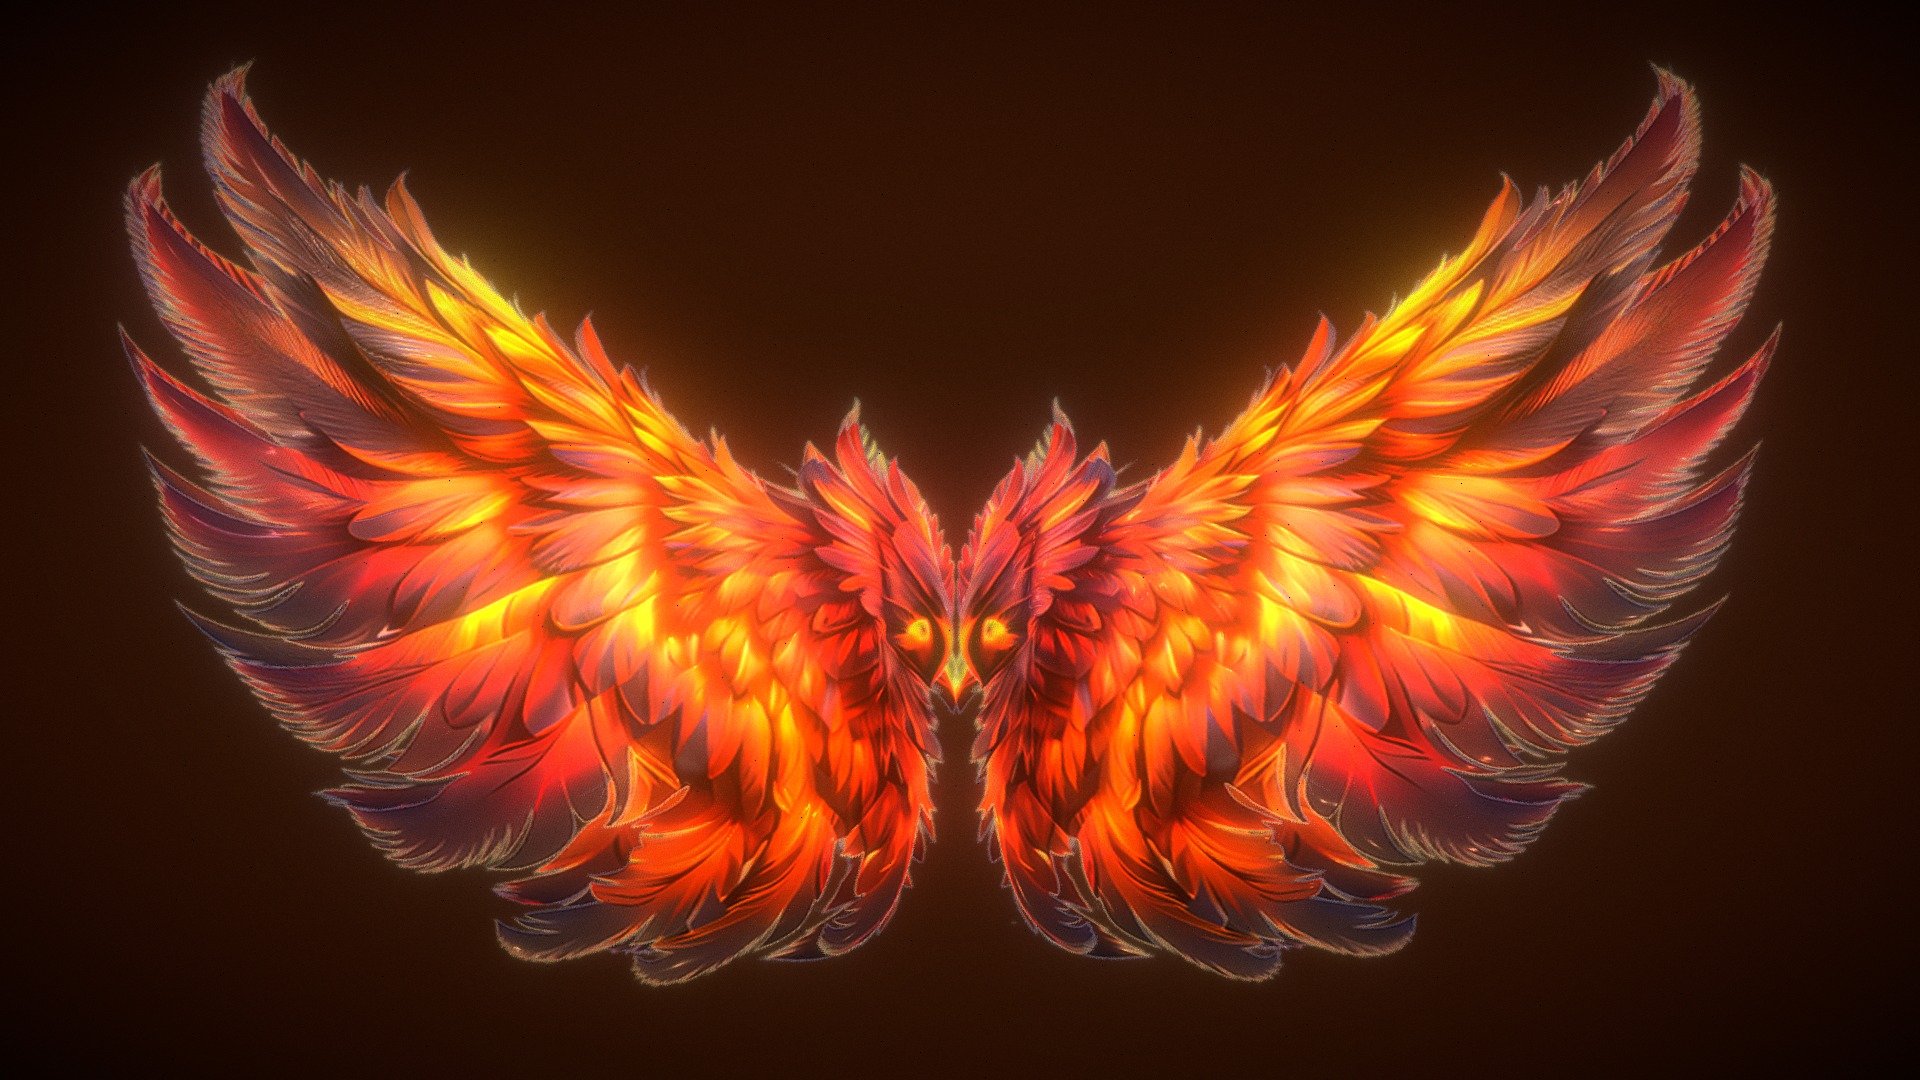 These very low poly realistic like style phoenix wings come animated and ready to attach to a character or object. The root bone can be parented to any other object or bone leaving a wide range of versatility. This set is the 7th one of the wings collection assets we are releasing. The texture was made using AI image generator software (Midjourney)

Images:

Albedo-Diffuse - 2048 x 2048 

Normal Map - 2048 x 2048

Vert count - 220

Tri count - 340

These wings have your own animations: 

Pose-0

Block

Fly_1

Fly_2

Fly_3

Idle_1

Idle_1_with_Wind

Idle_2

Idle_2_B

Idle_2_B_with_Wind

Plane-1

Plane-2

Plane_3

Bugsproblems
eed more animations or budget =&gt; Dr.Carvalho#2557 (discord) - Low Poly Animated Phoenix Wings - Buy Royalty Free 3D model by Leonardo Carvalho (@livrosparacriancas) 3d model